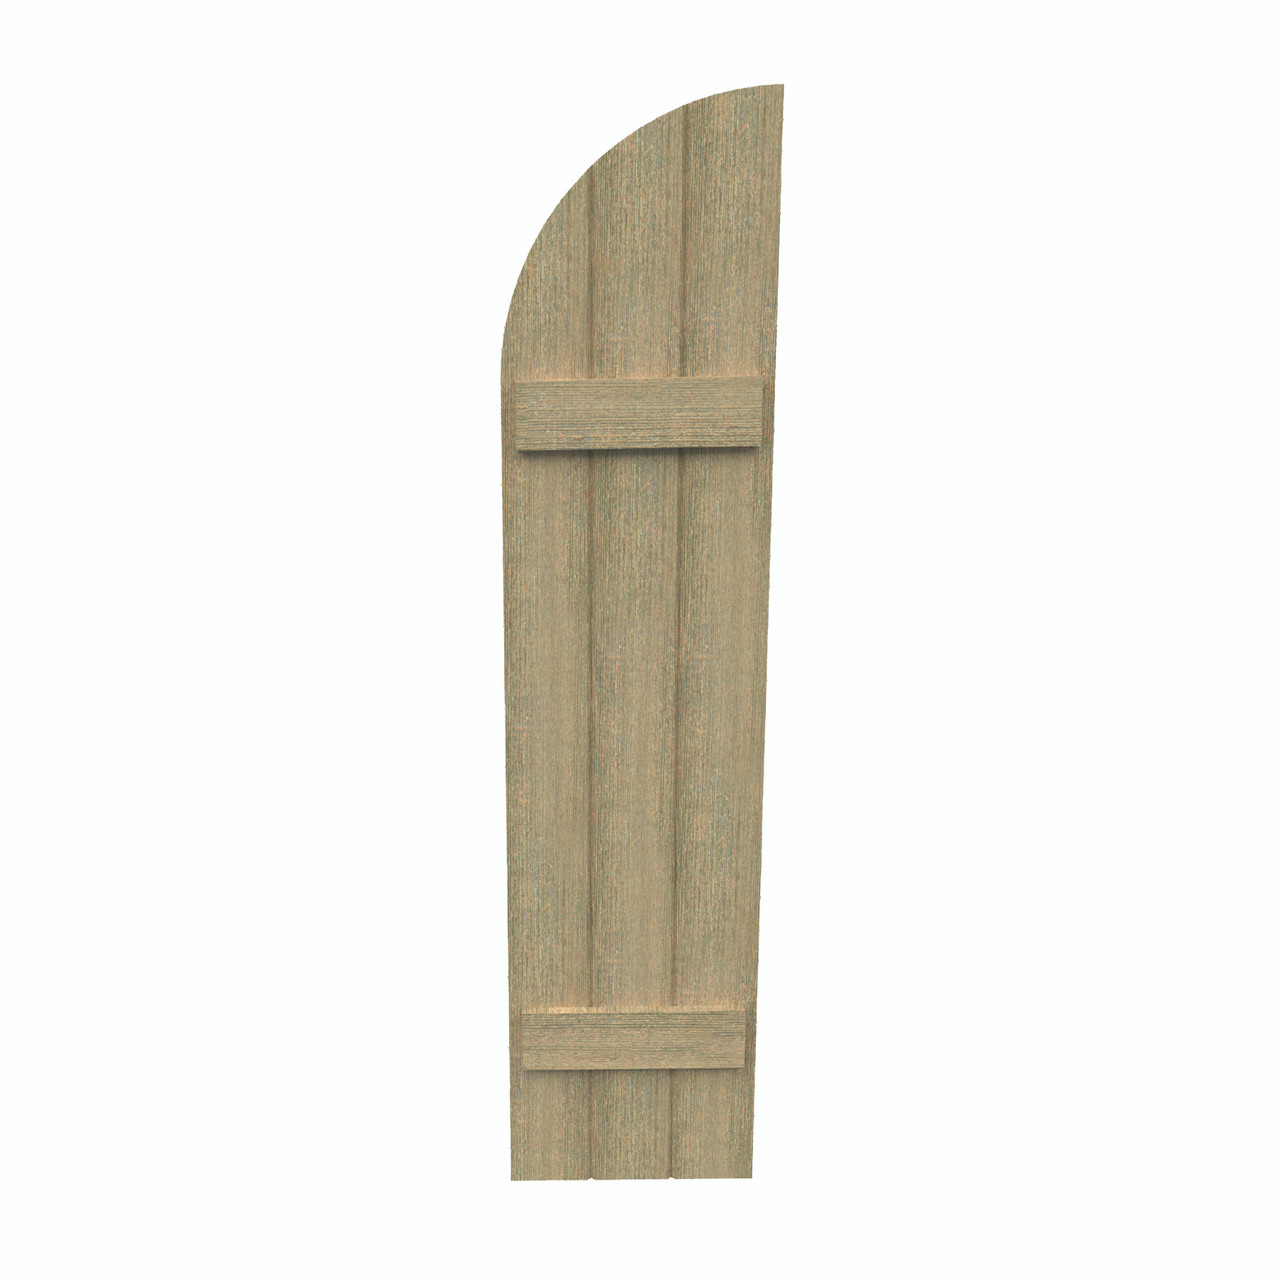 14 inch by 73 inch Quarter Round Shutter with 3-Boards